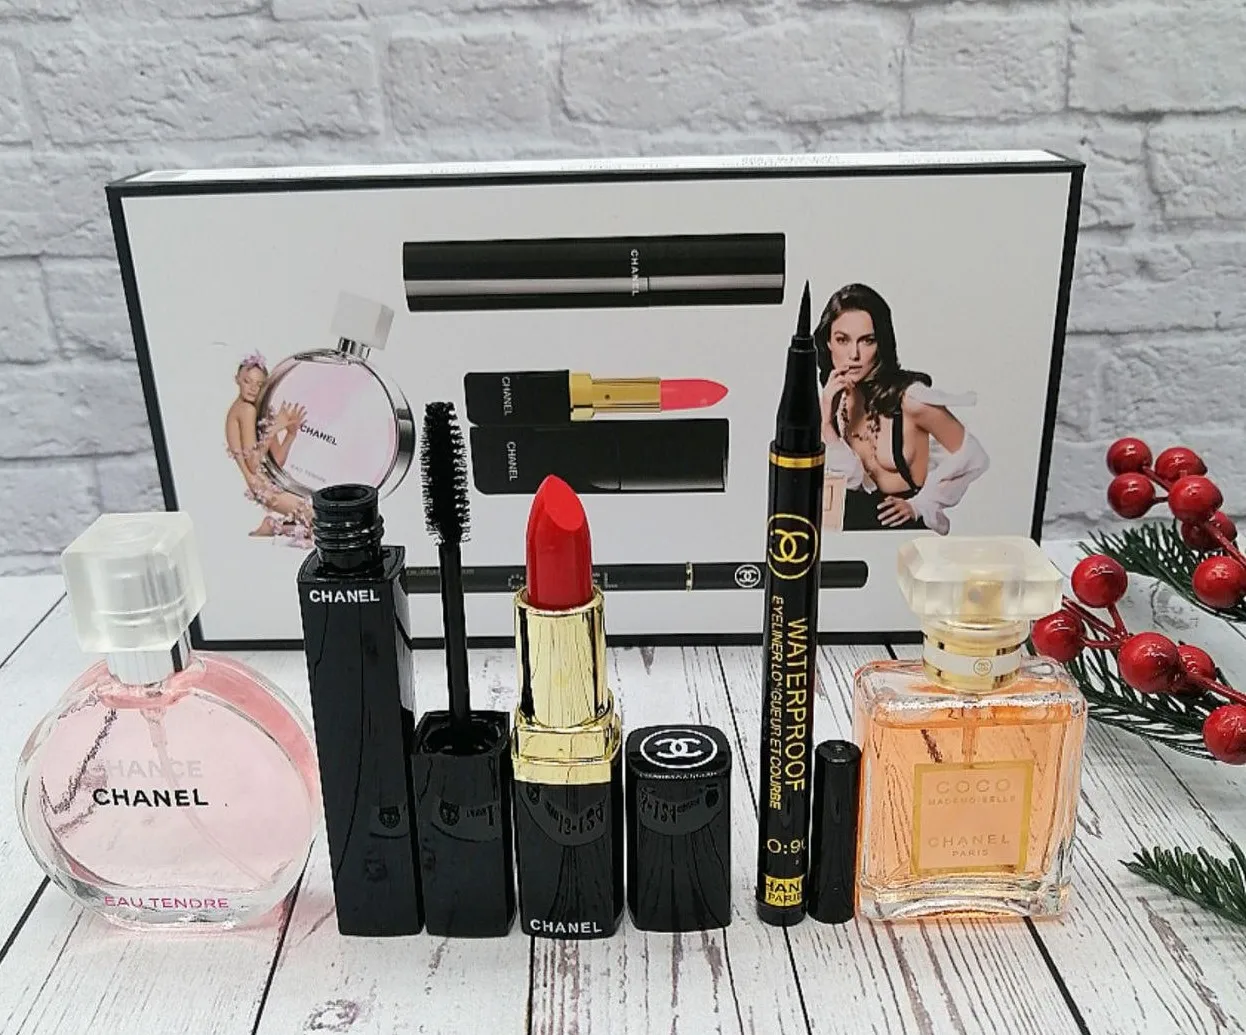 Buy The Chanel Gift Set - Chance Eau Tendre, Coco Mademoiselle, Chanel No.  5